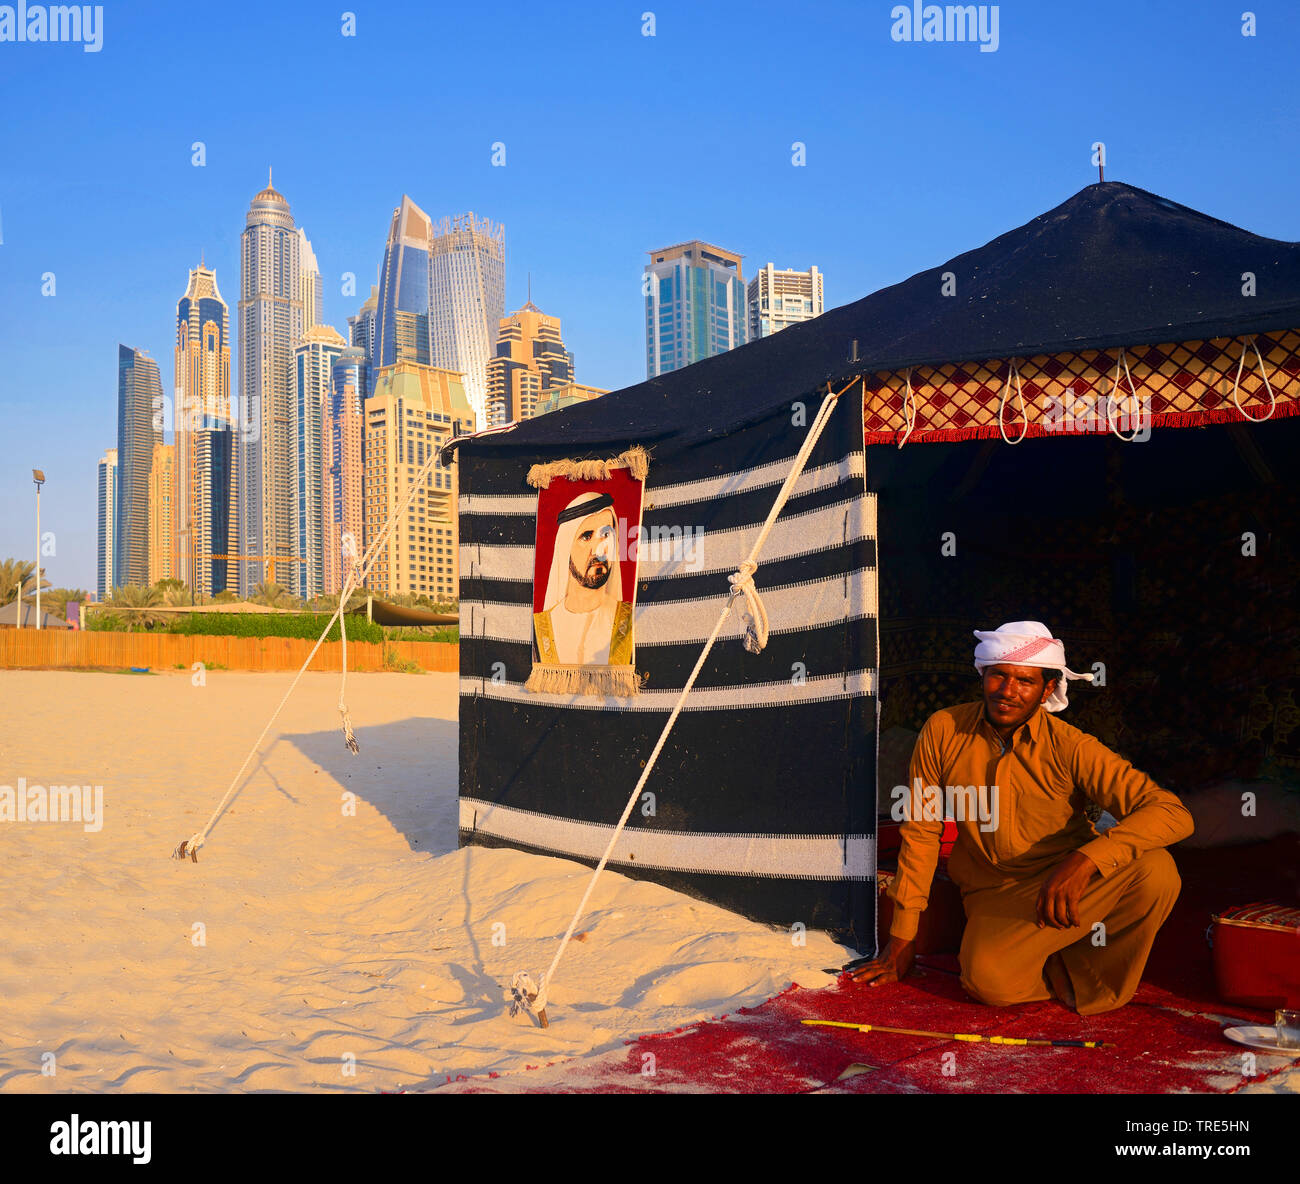 bedouin man and his camp in front of skyscrapers of Dubai, United Arab Emirates, Dubai Stock Photo